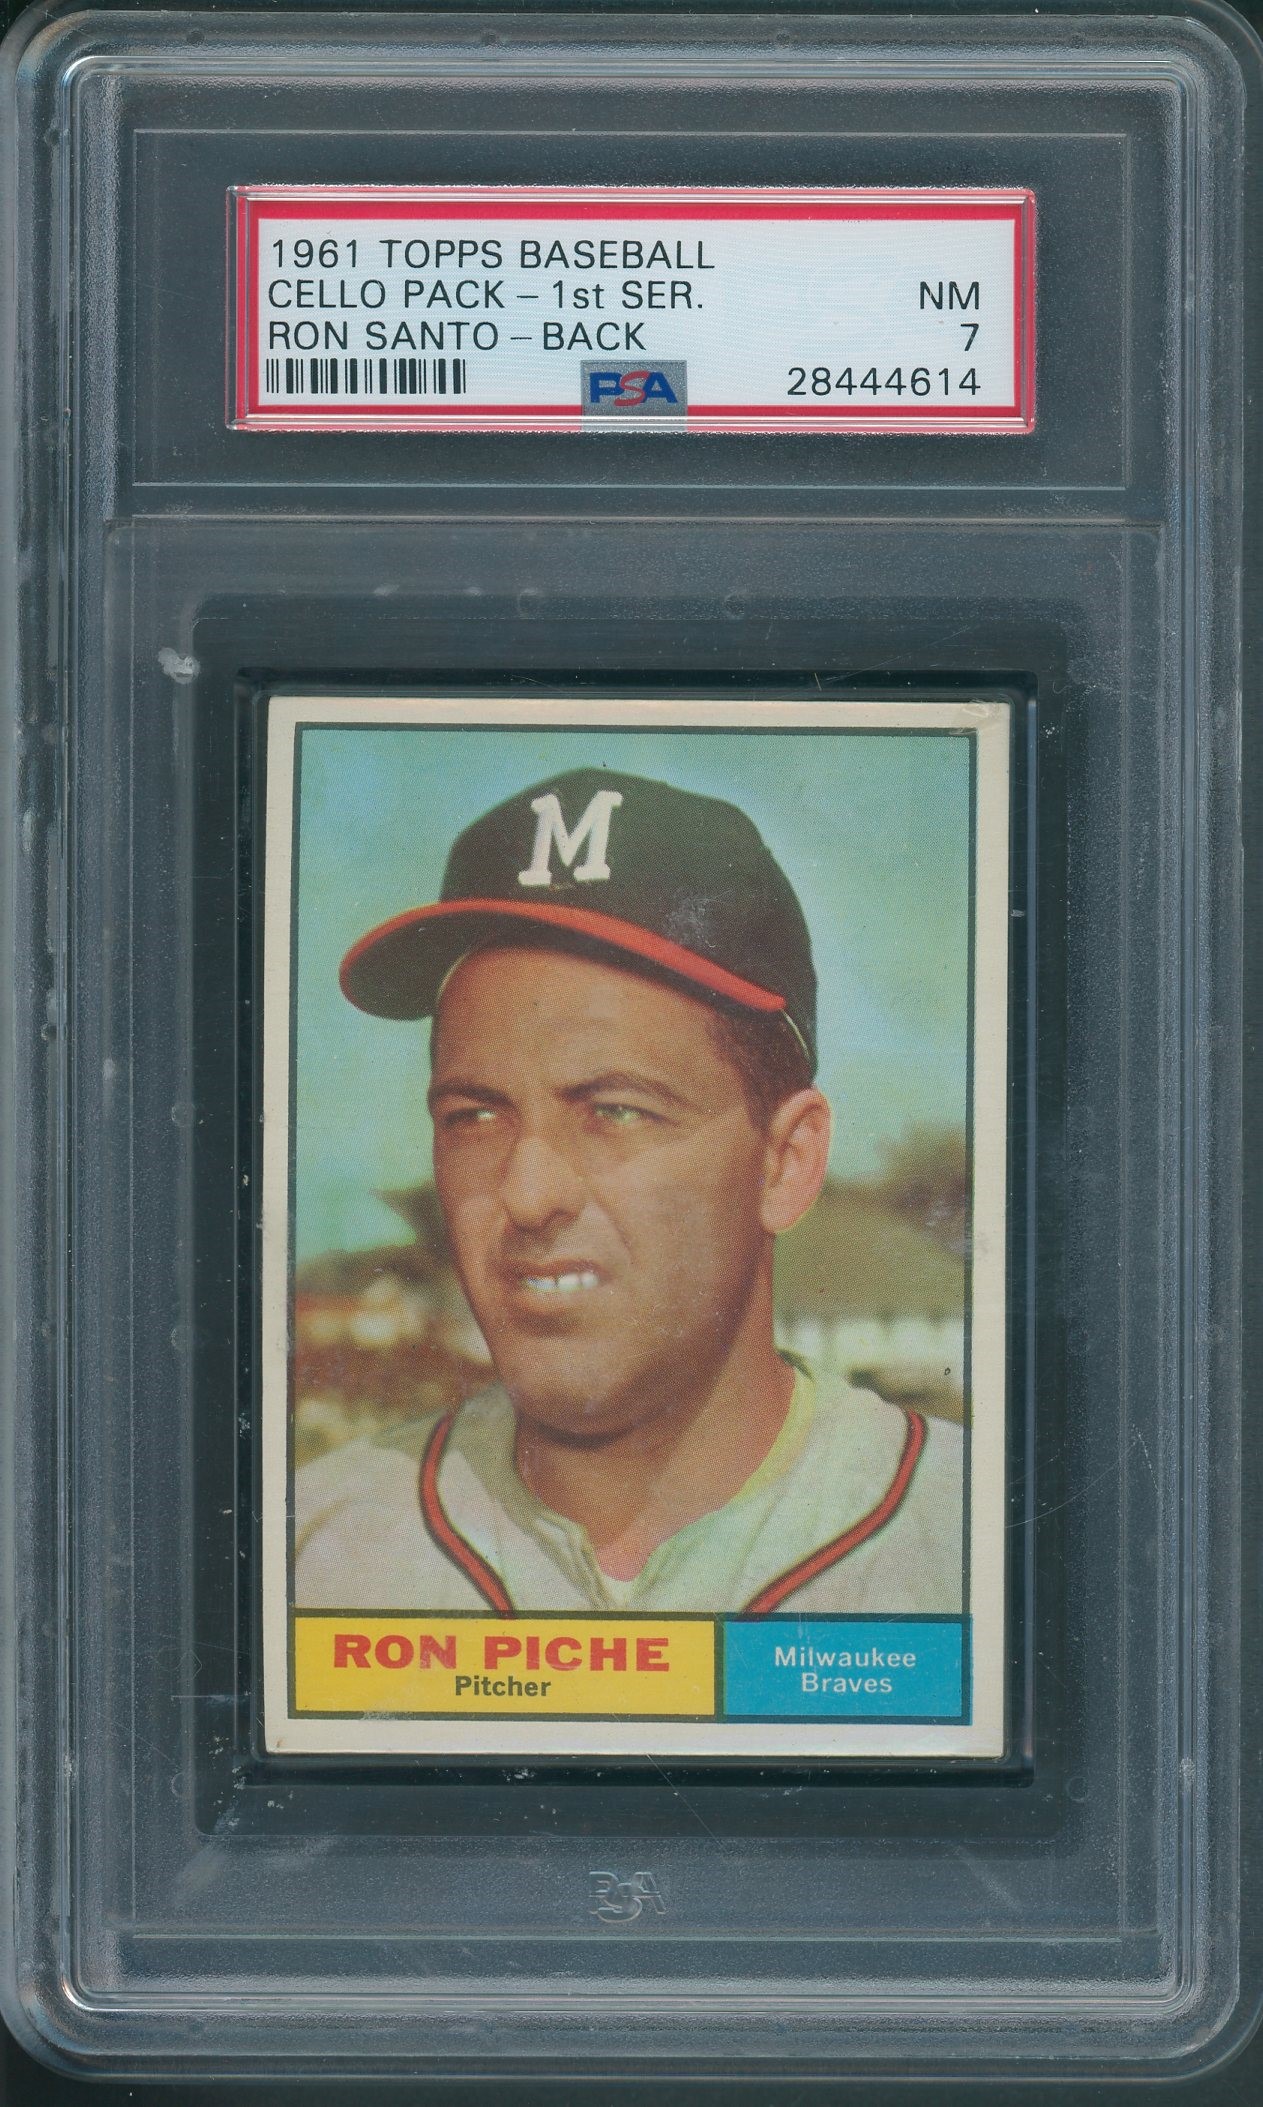 Ron Santo Rookie 1961 Topps Baseball Card original Issue as 